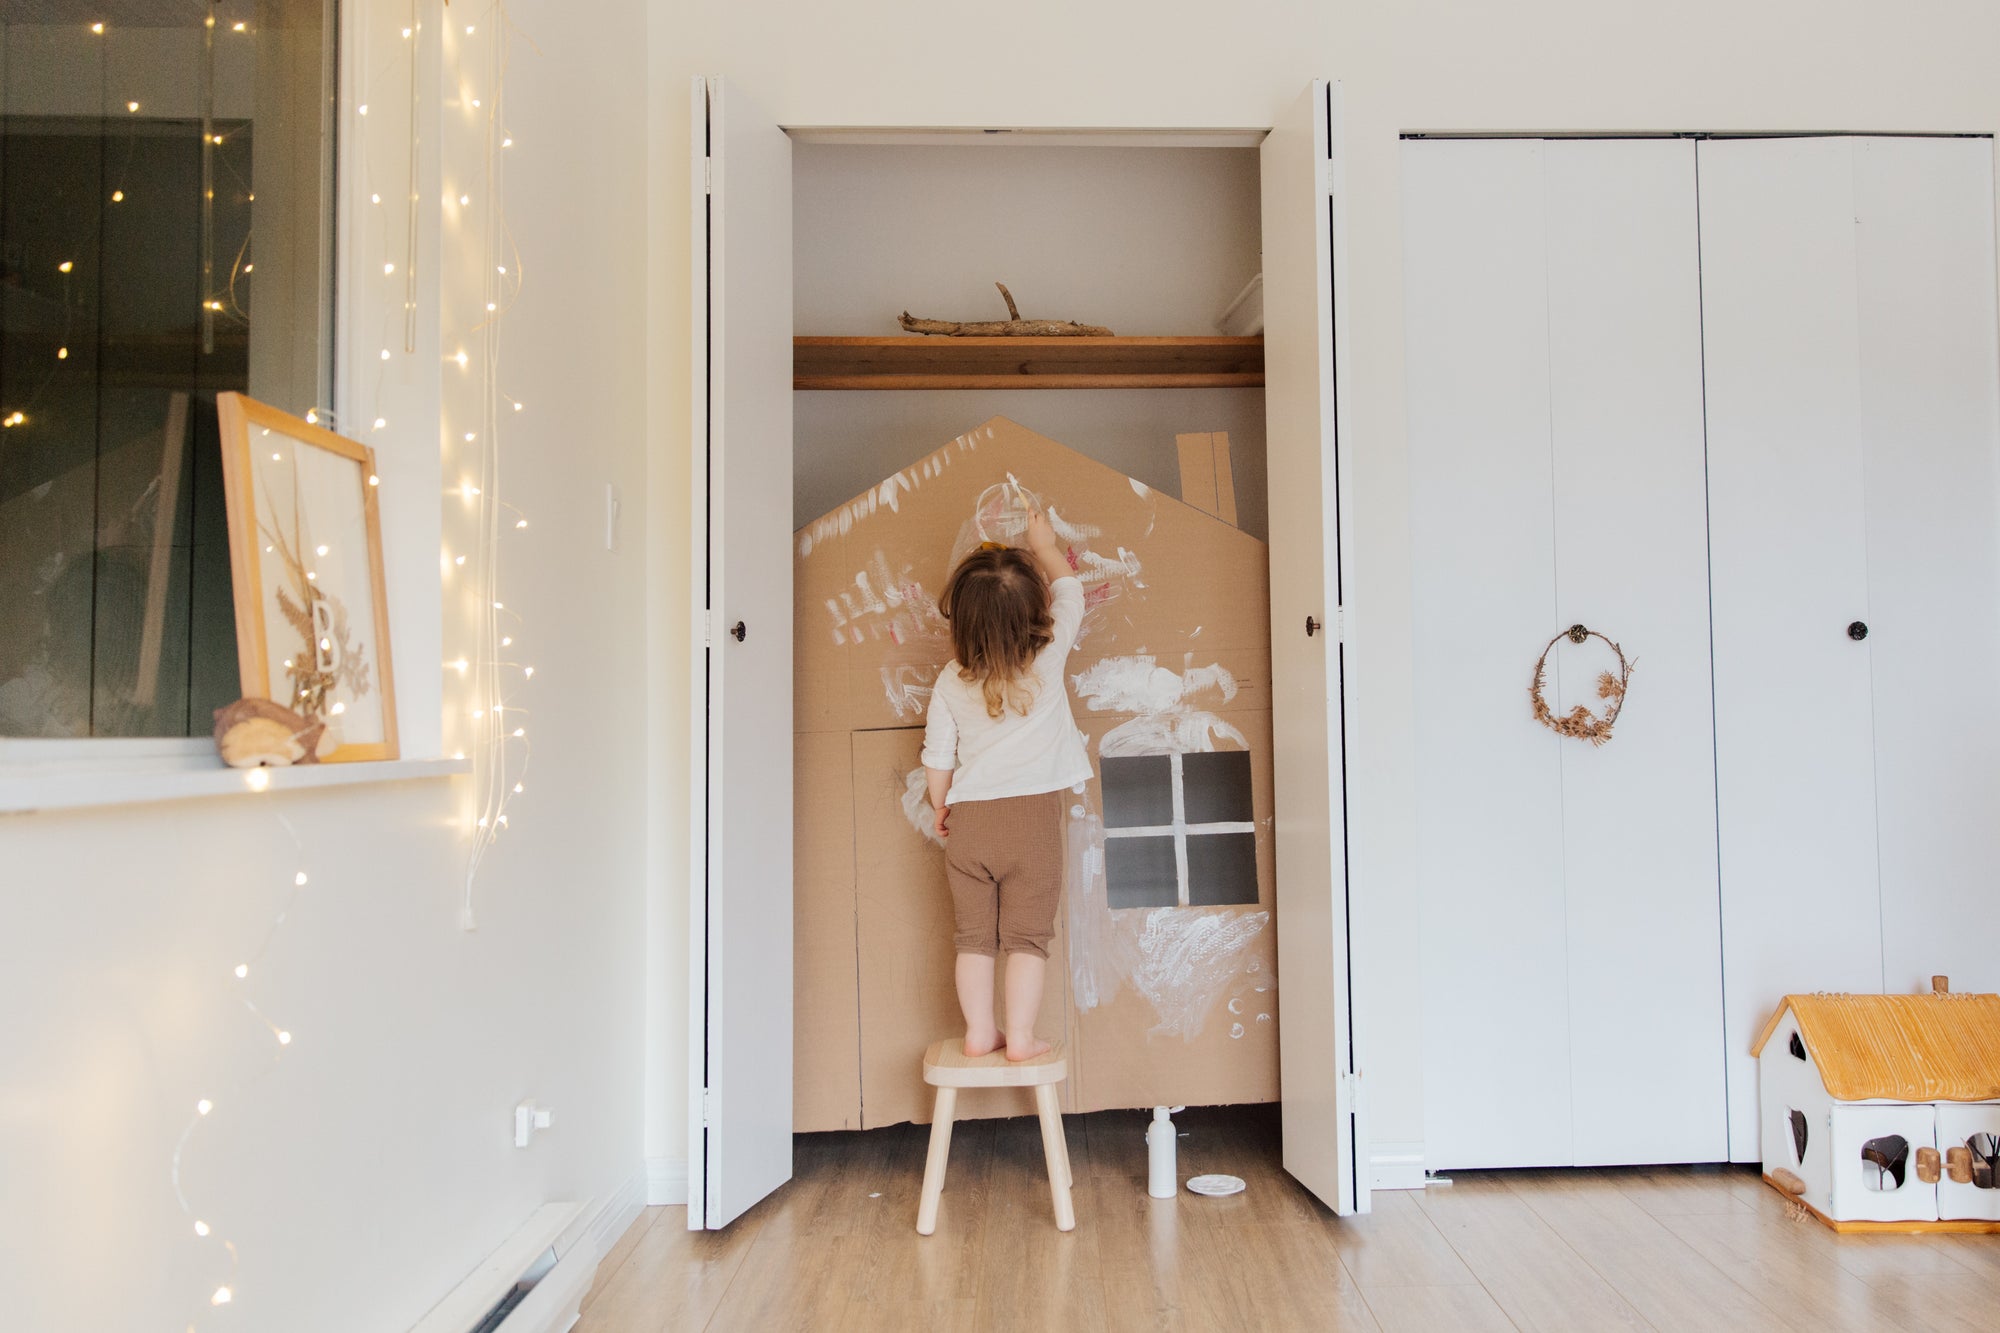 Toddler uses a stool to play with her doll house